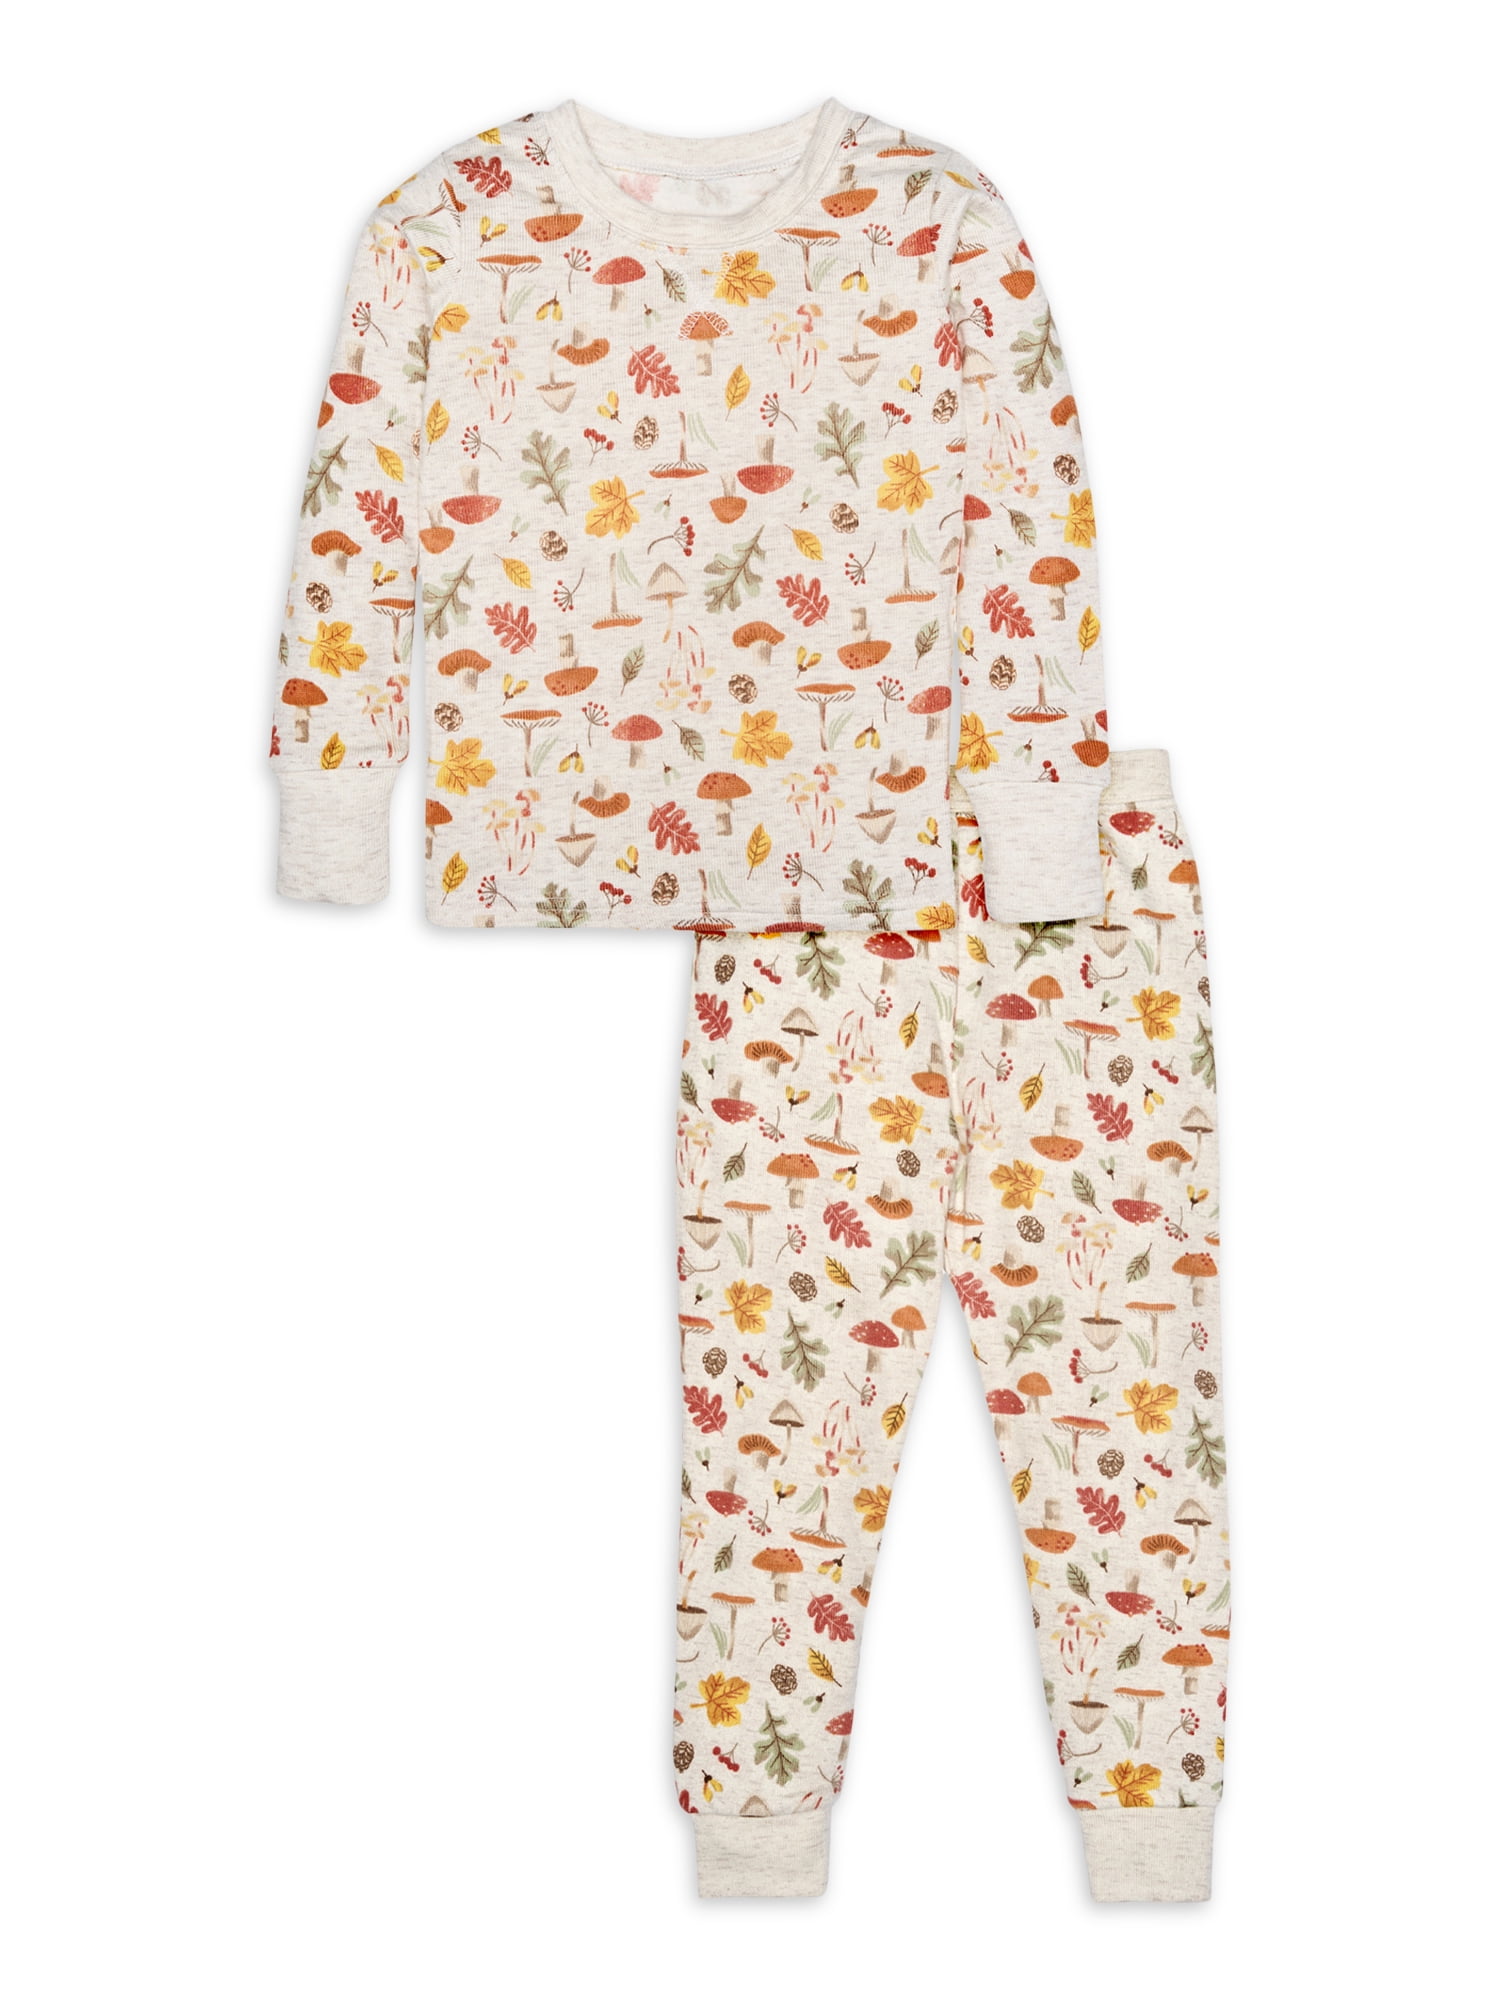 Modern Moments By Gerber Toddler Girl Tight Fitting Pajamas Set, 2 ...